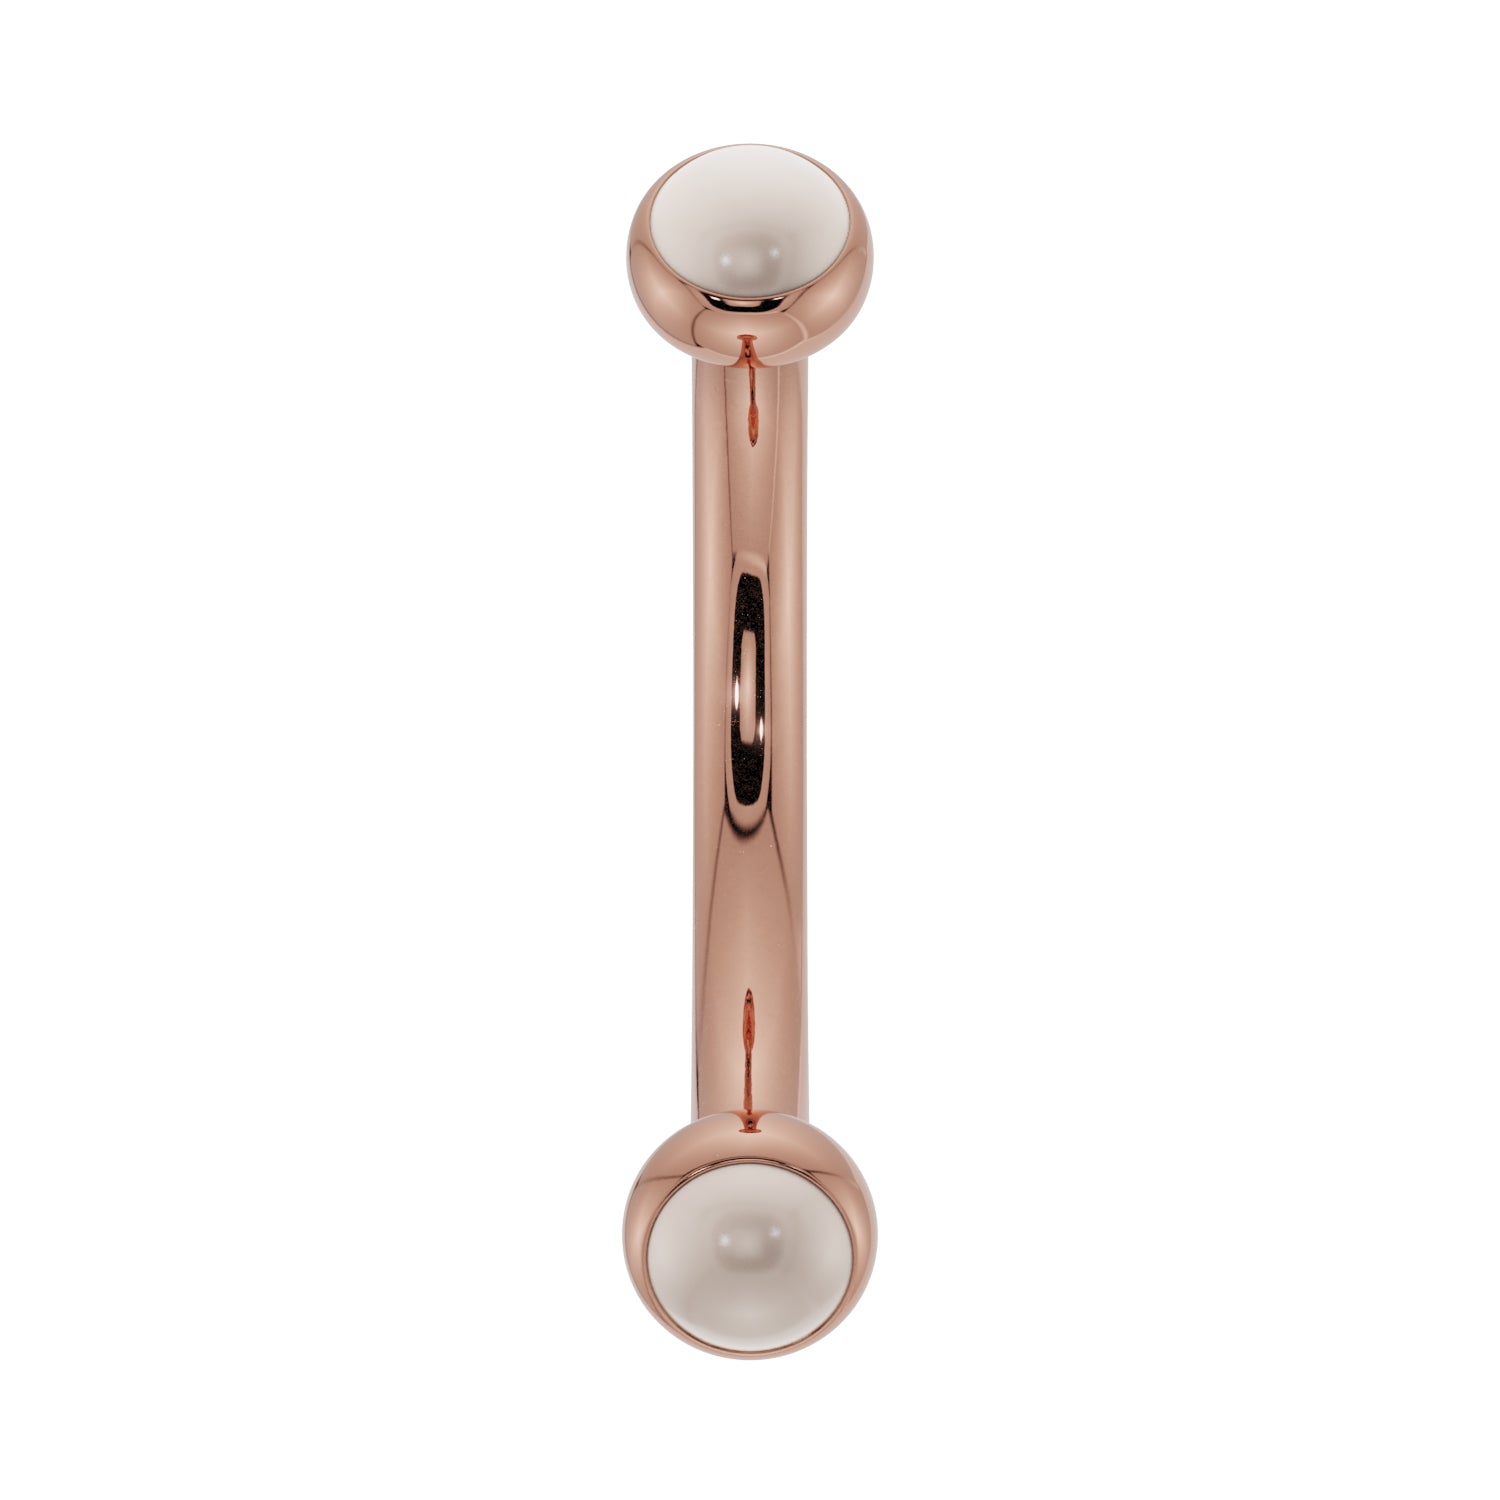 Dainty Pearl Bezel-Set Curved Barbell for Eyebrow Rook Belly-14K Rose Gold   16G (1.2mm)   7 16